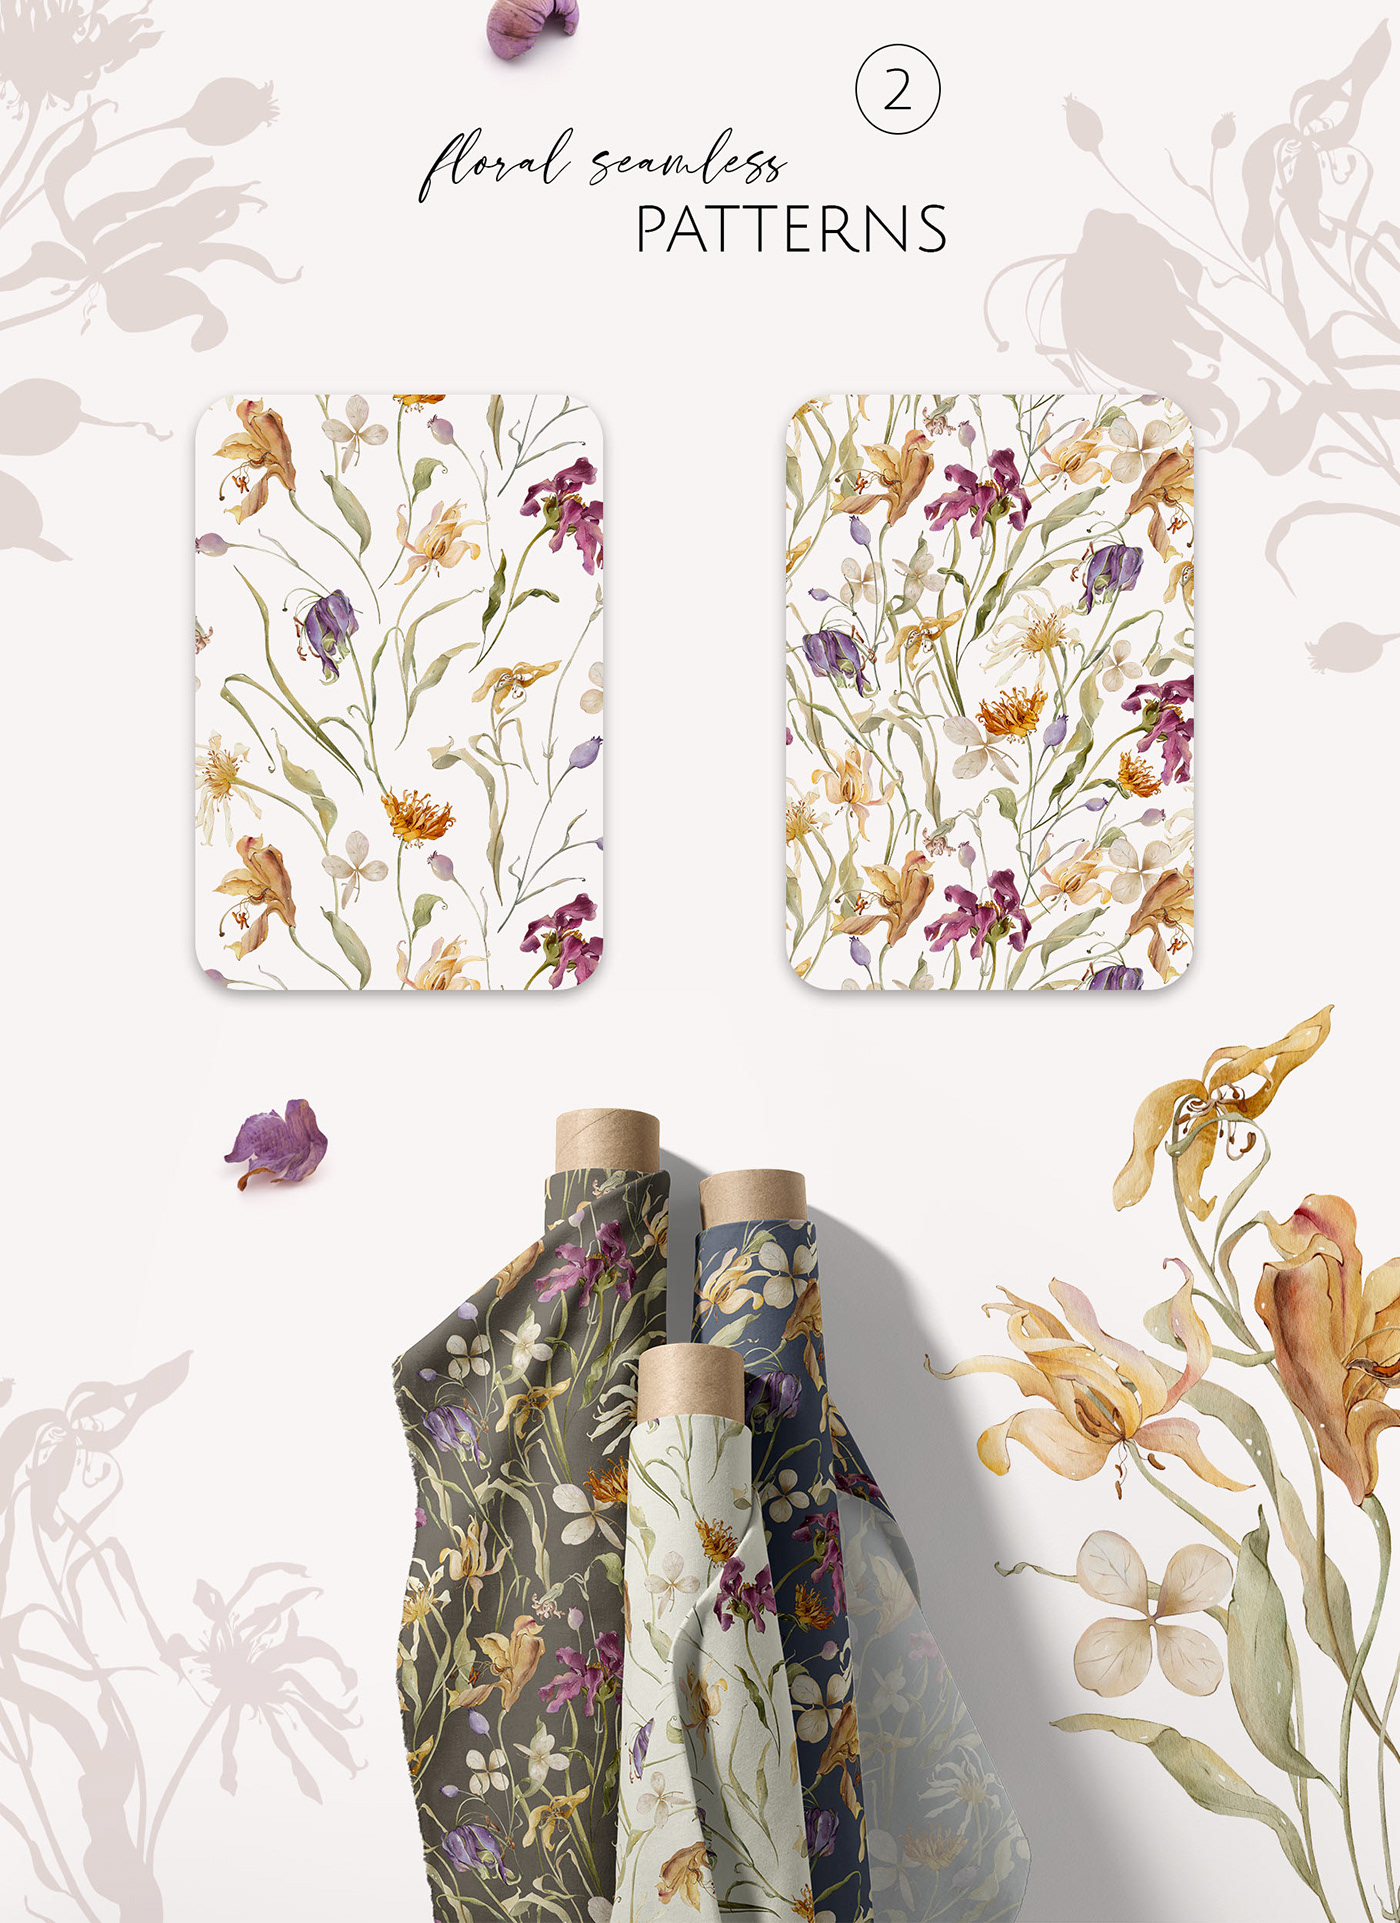 dry dry flowers flower autumn clip art autumn pattern floral pattern Surface Pattern fabric design wallpaper Wrapping paper botanical botany autumn garden dry autumn dry flower pattern Fall flower fall watercolor Garden Flower garden flower pattern watercolor autumn watercolor dry flowers